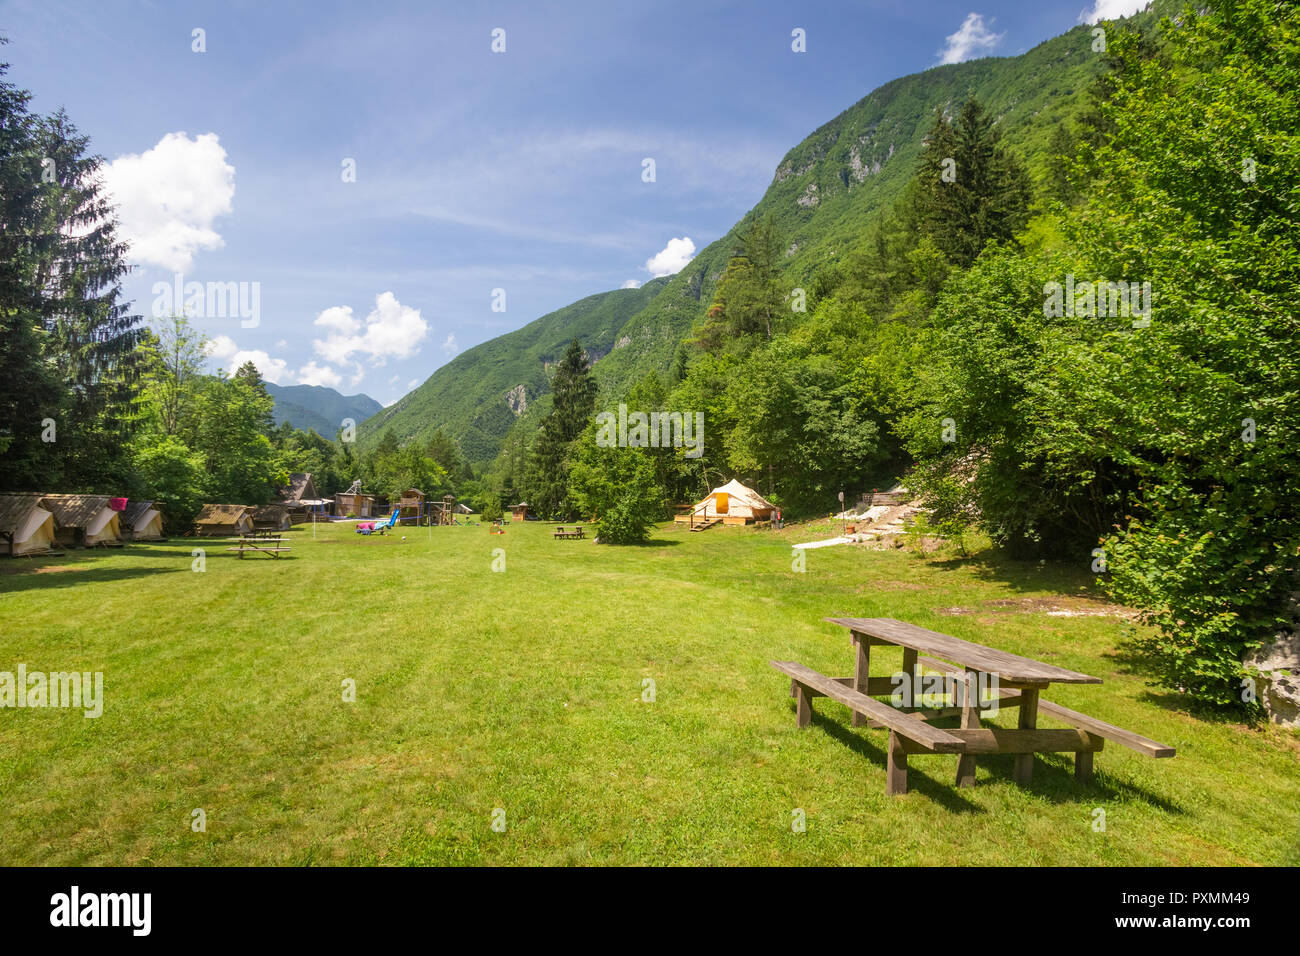 Wide view of Adrenaline Check eco camp resort in Soca valley in Slovenia. Stock Photo